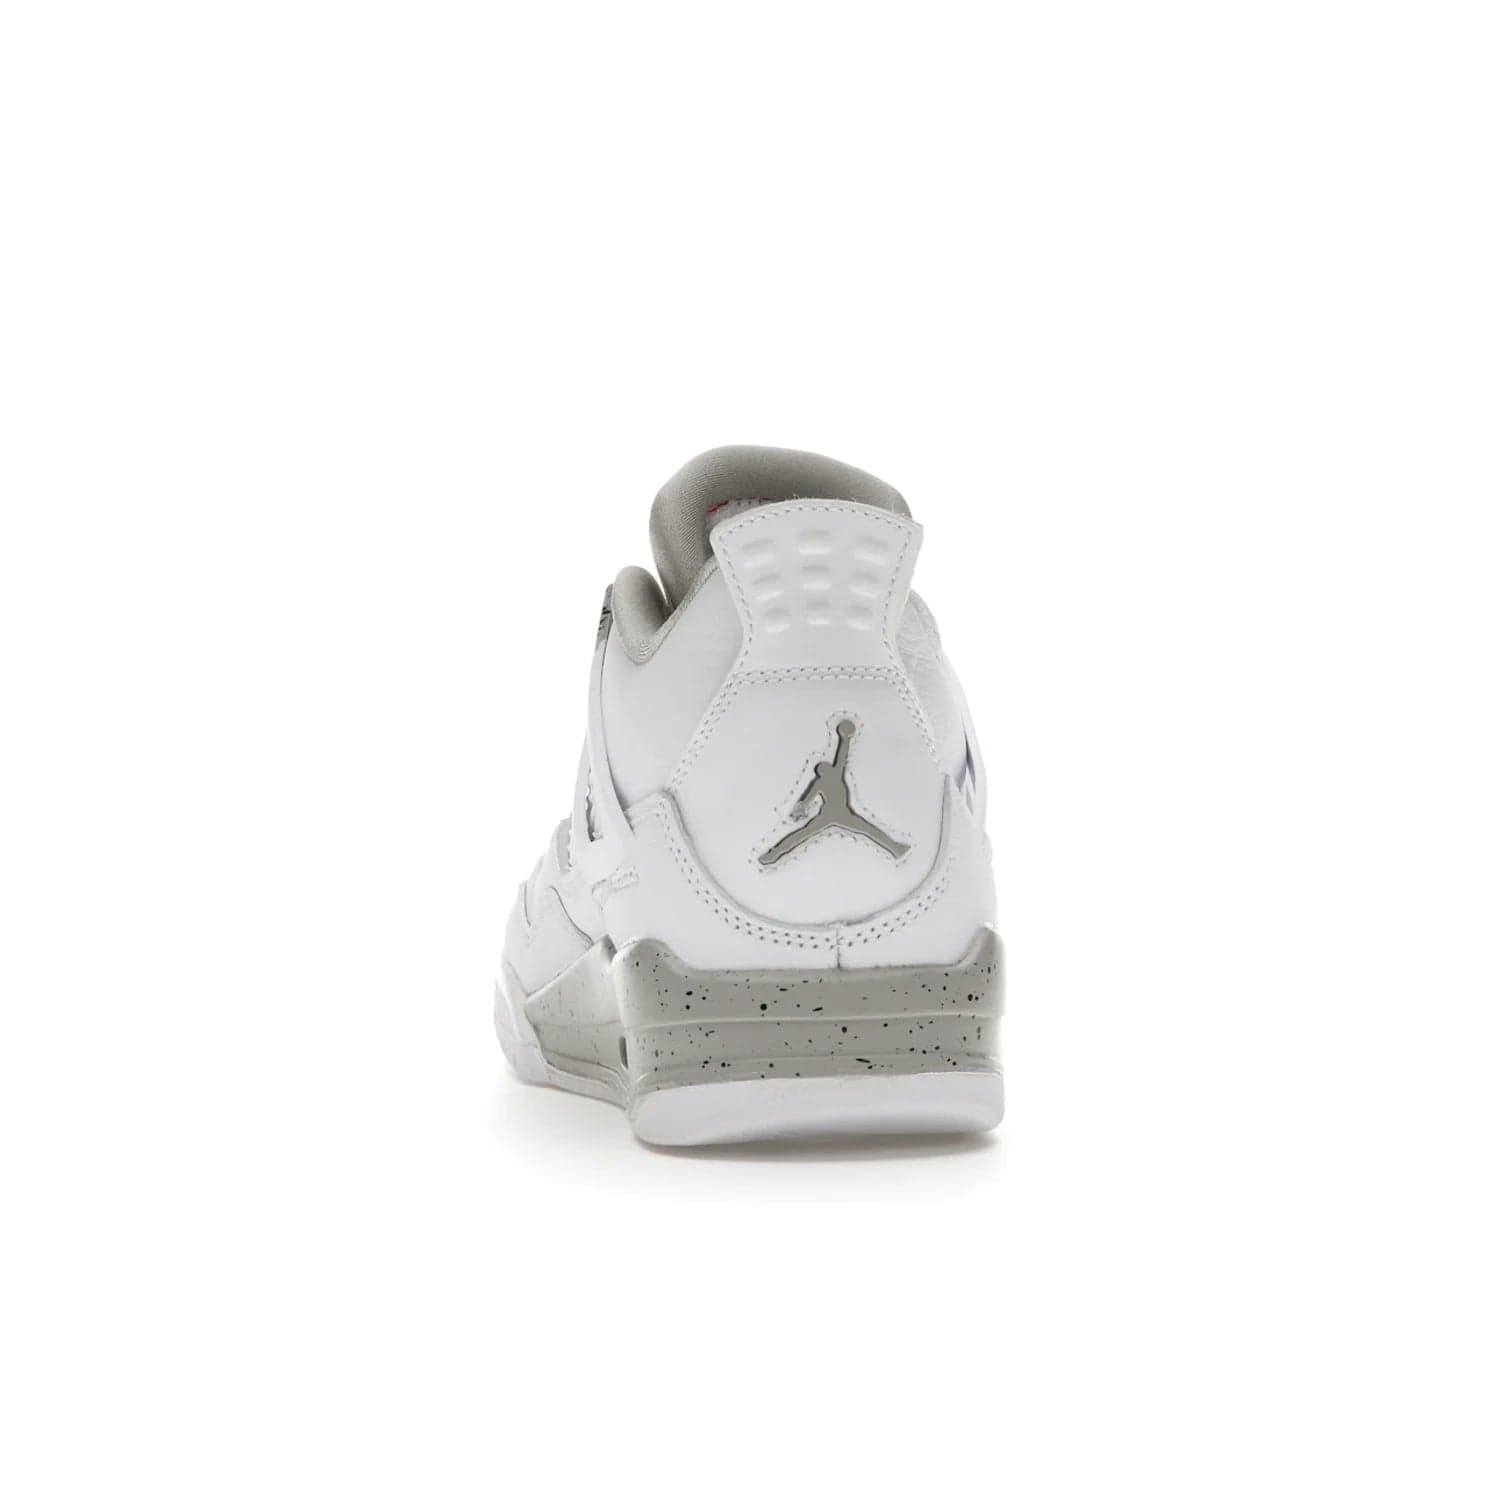 Jordan 4 Retro White Oreo (2021) (GS) - Image 27 - Only at www.BallersClubKickz.com - White Oreo Air Jordan 4 Retro 2021 GS - Iconic sneaker silhouette with white canvas upper, Tech Grey detailing, and Fire Red accents. Available July 2021.